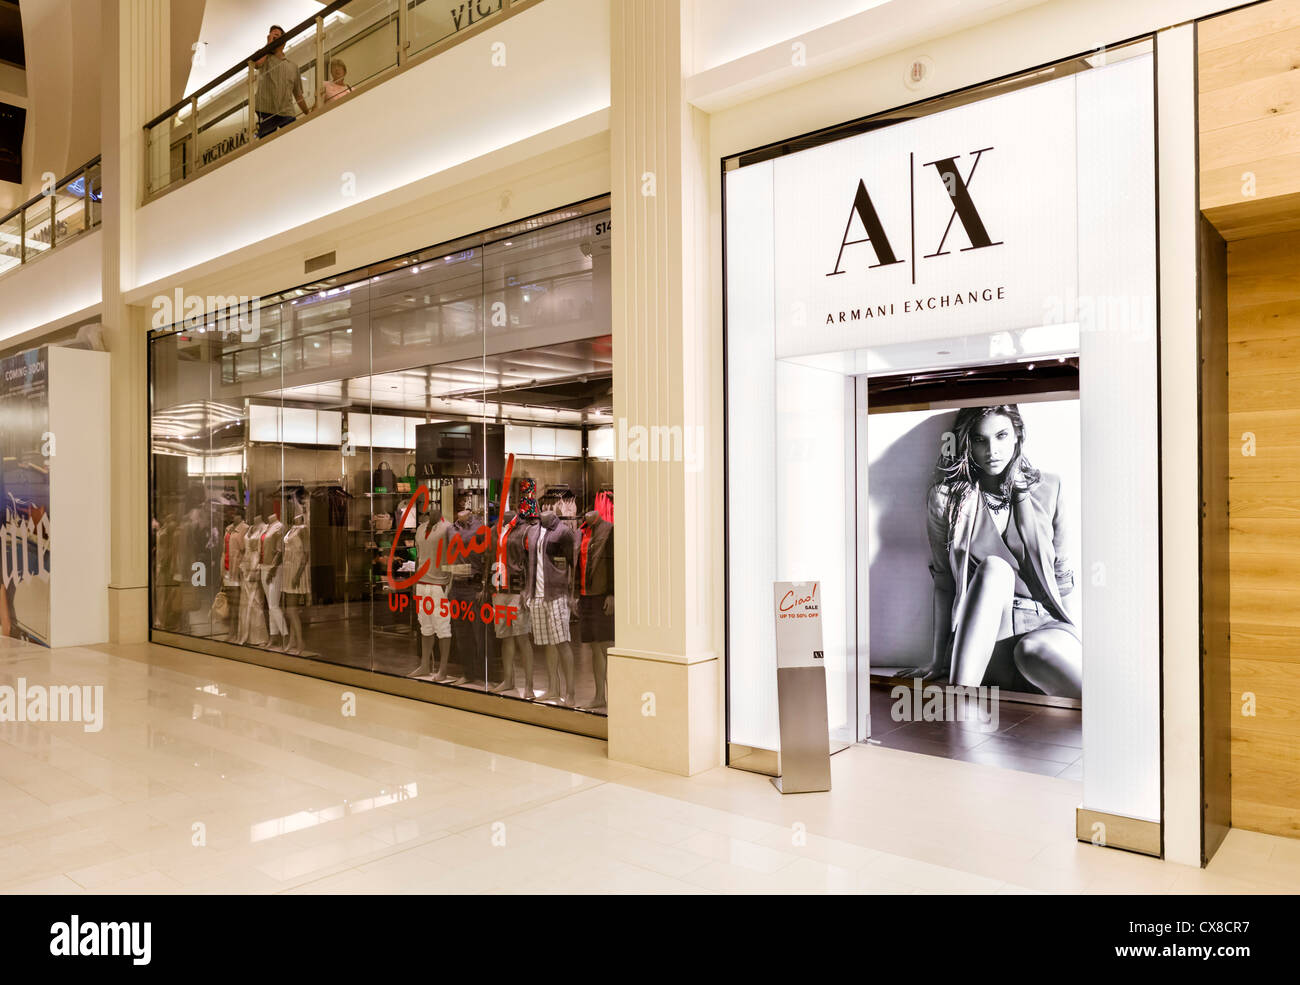 armani exchange outlet canada - 59% OFF 